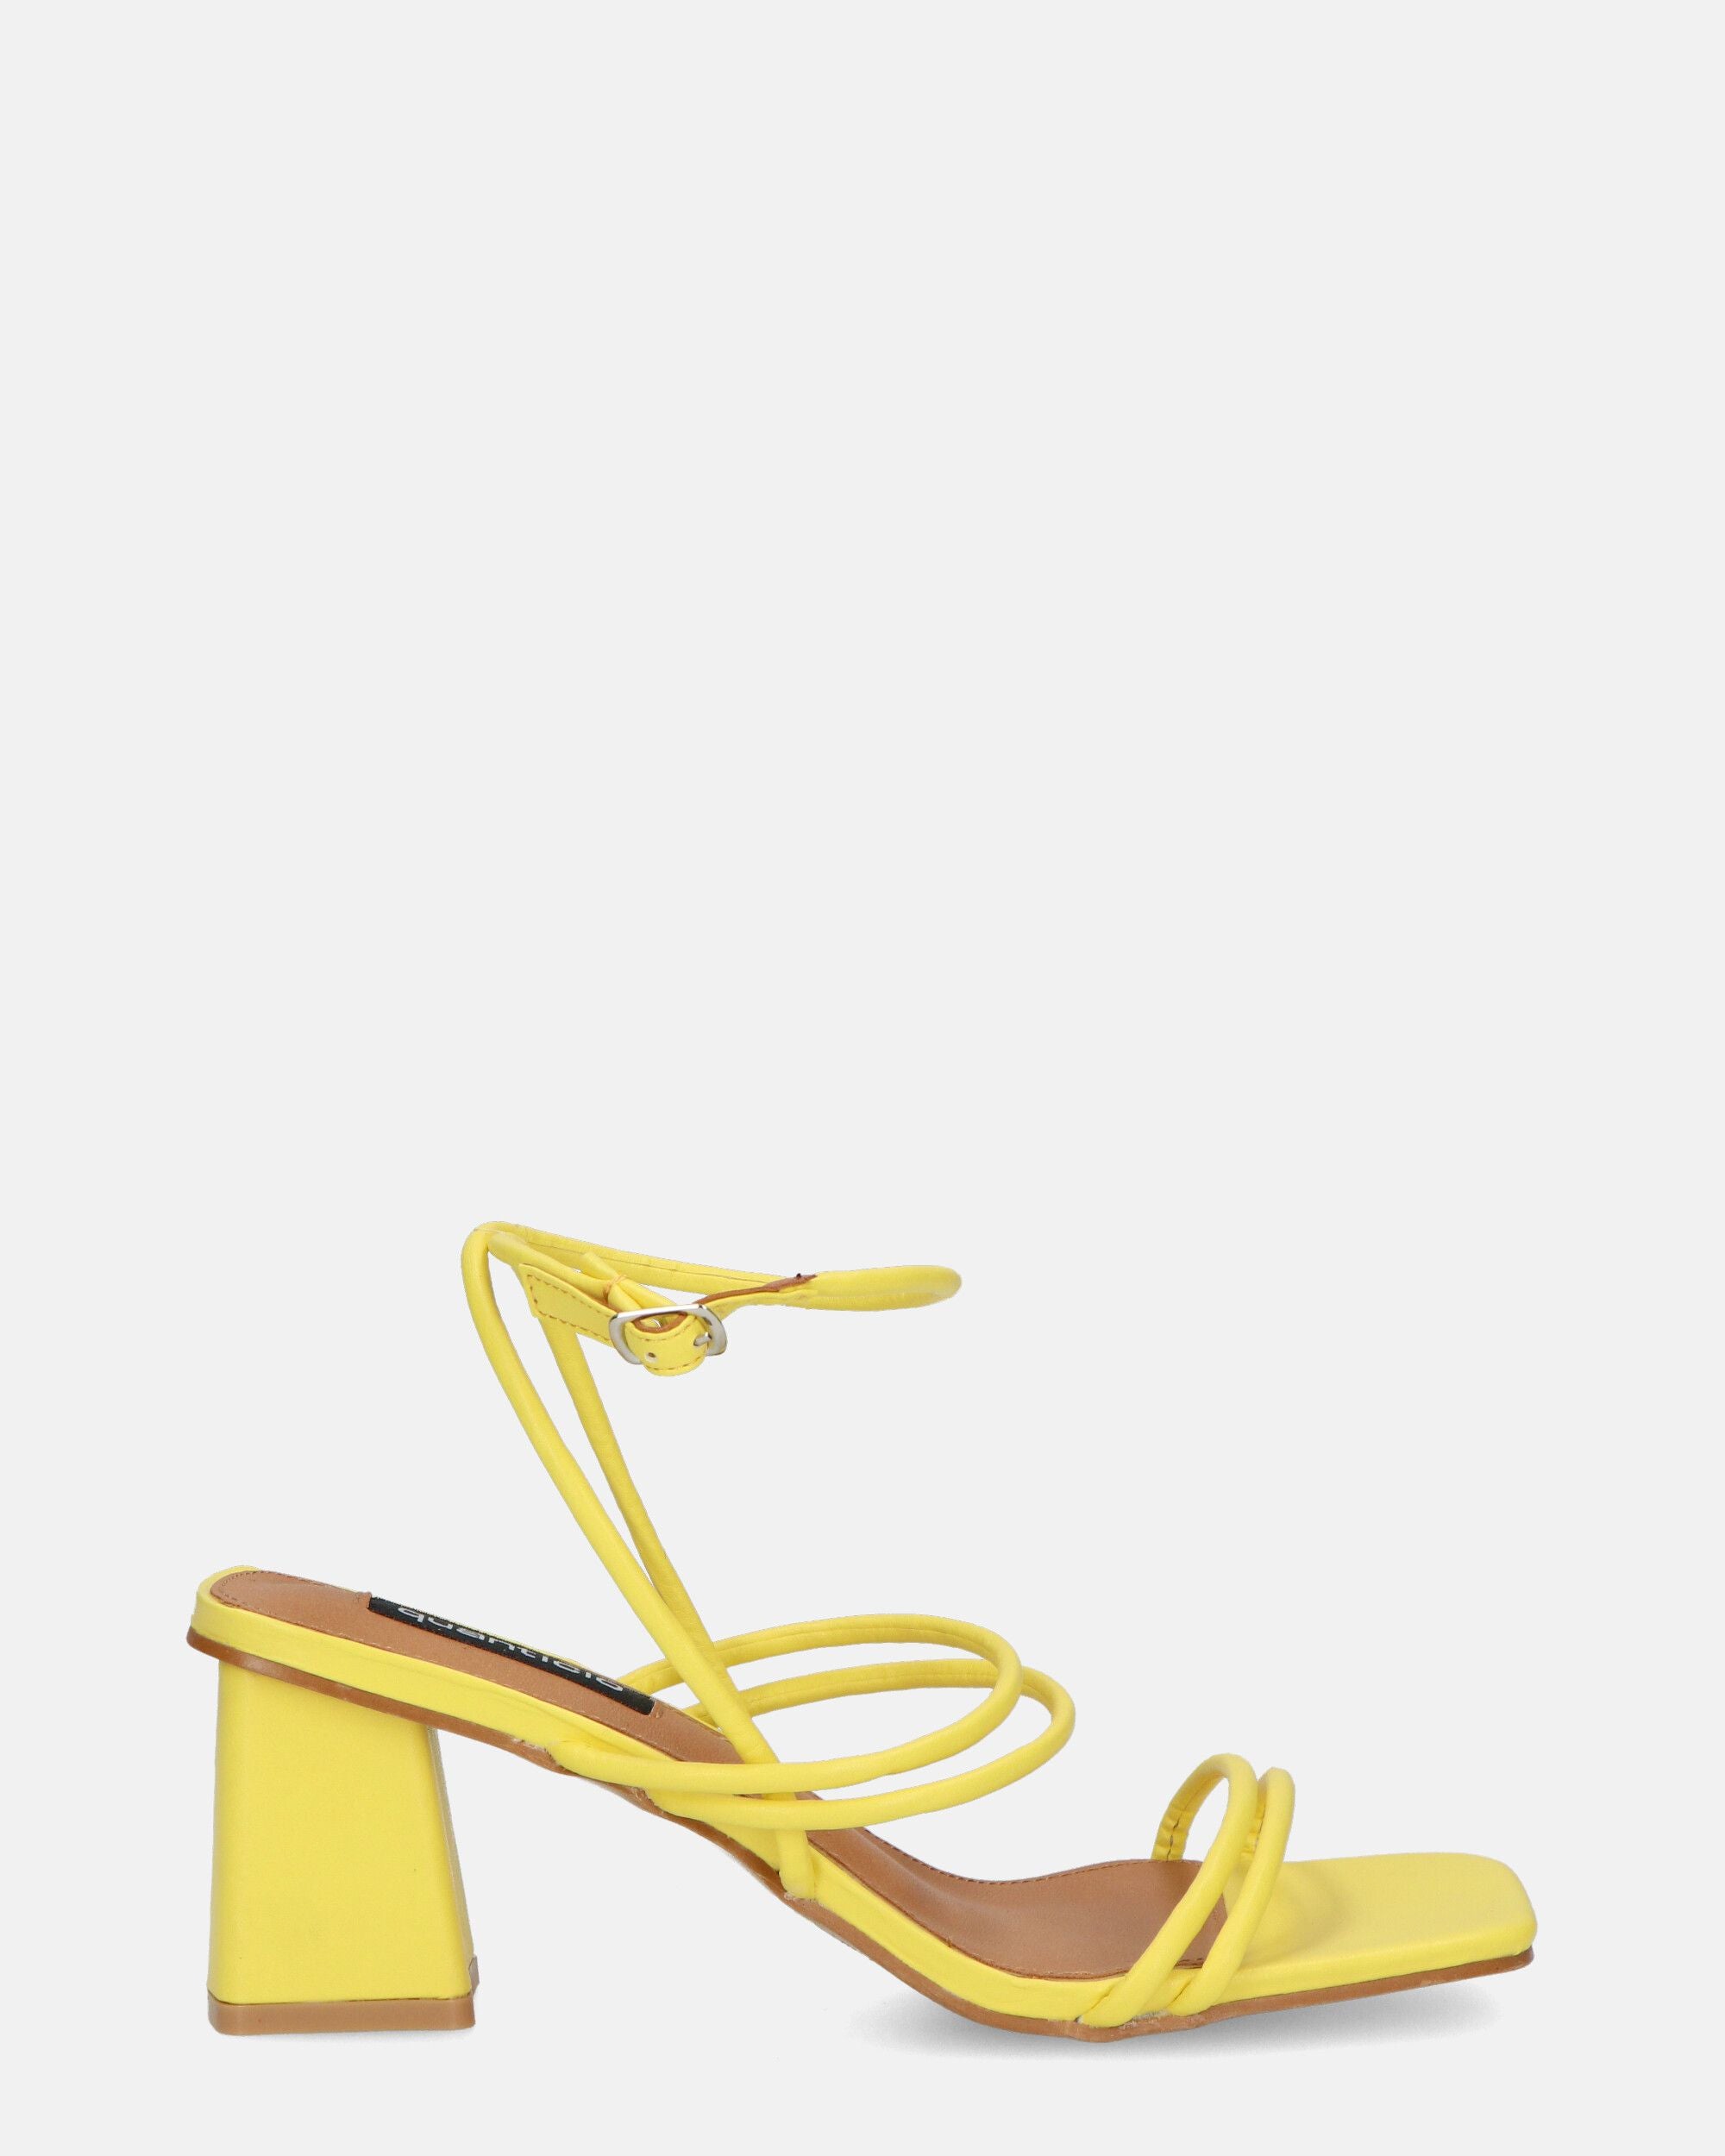 TIARA - yellow eco-leather sandals with laces